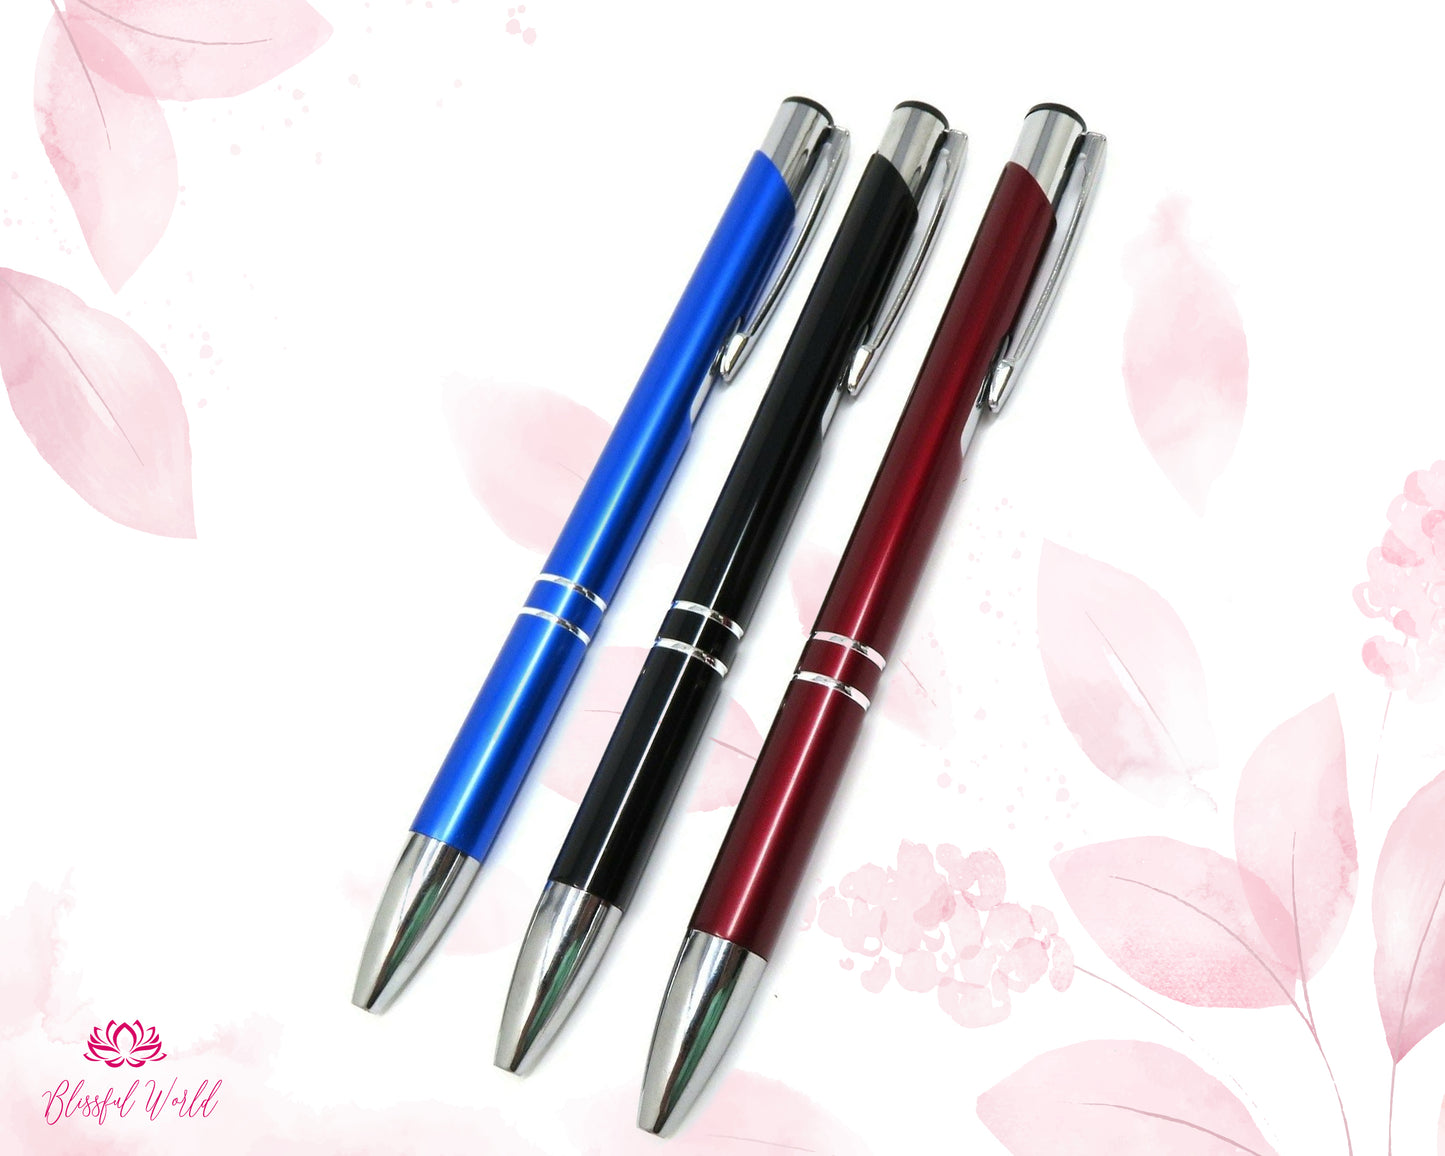 Personalize Pens Custom Engraved Pen Customized Pens with Stylus Custom Name Pens Birthday Gift Pens Teacher's Gift for Teachers and Writers Name on Pen